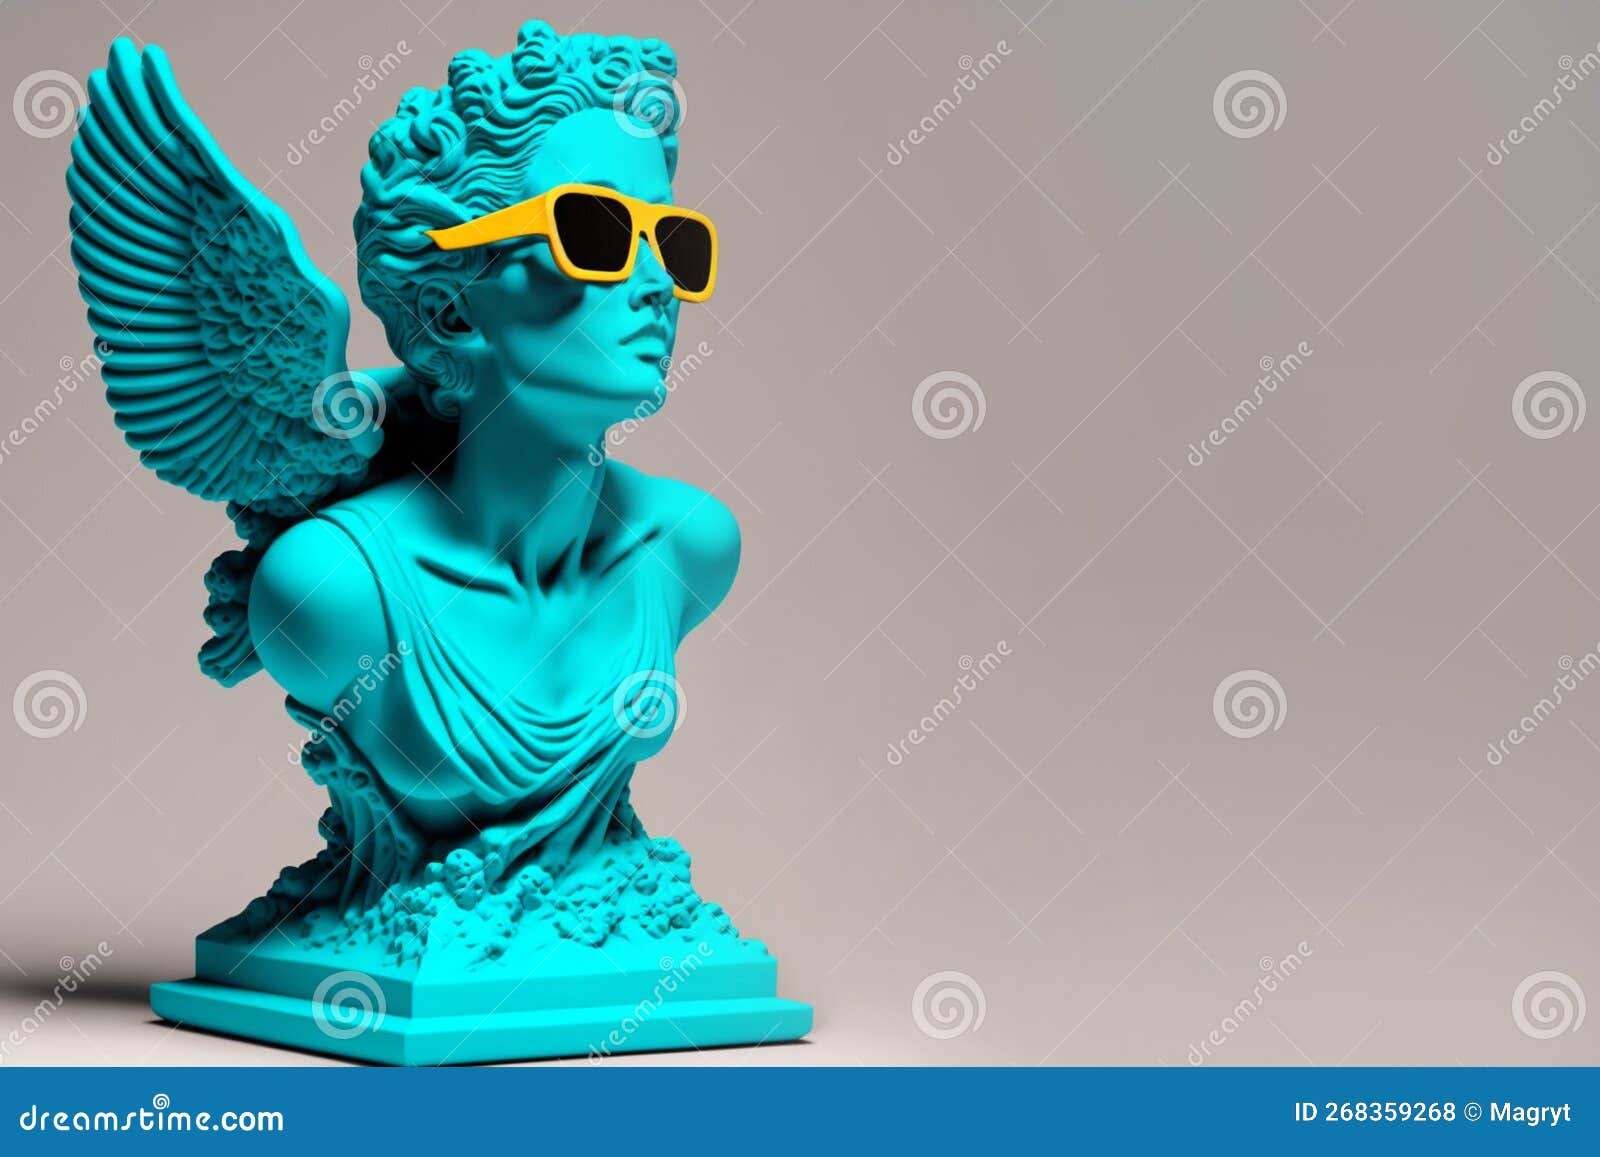 Bust Sculpture with Sunglasses. Sculpture in Glasses, Minimal